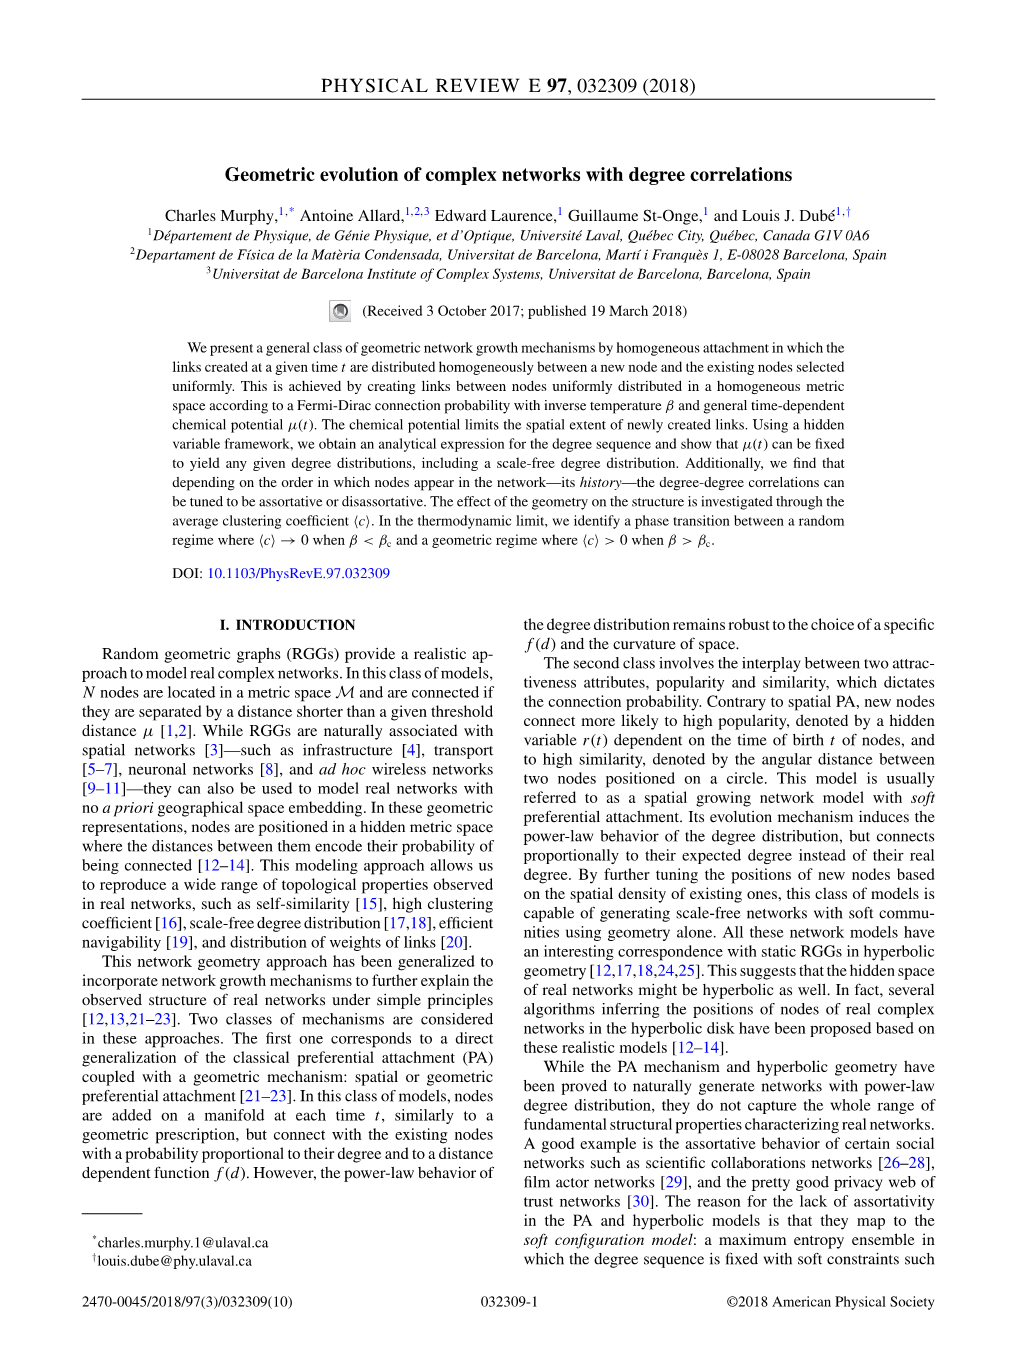 Geometric Evolution of Complex Networks with Degree Correlations